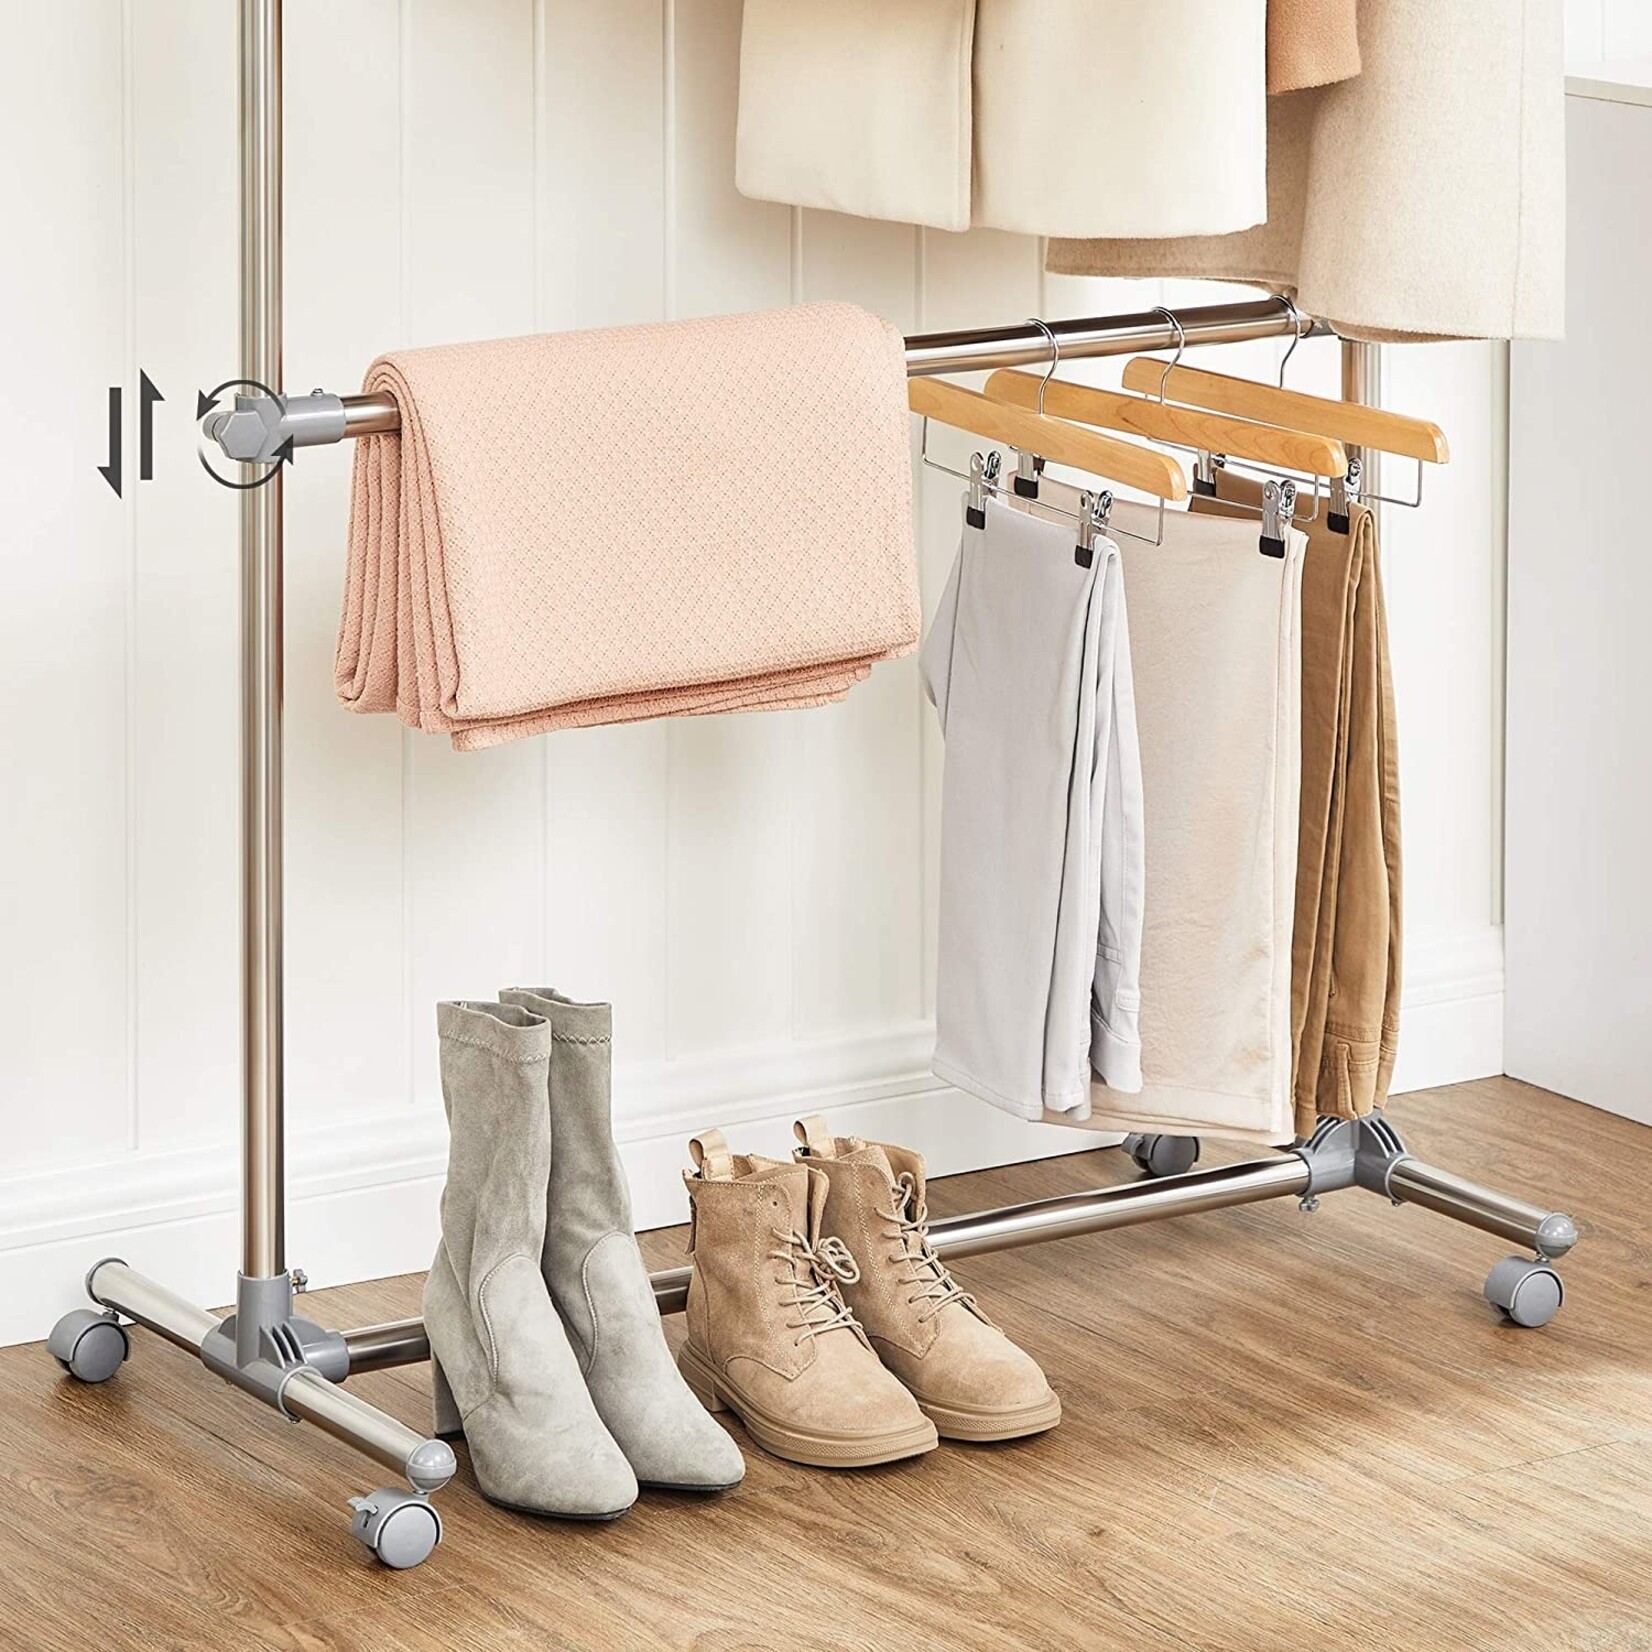 Bobbel Home Bobble Home - Wardrobe Rack - With Wheels - Height Adjustable - Stainless Steel - Silver